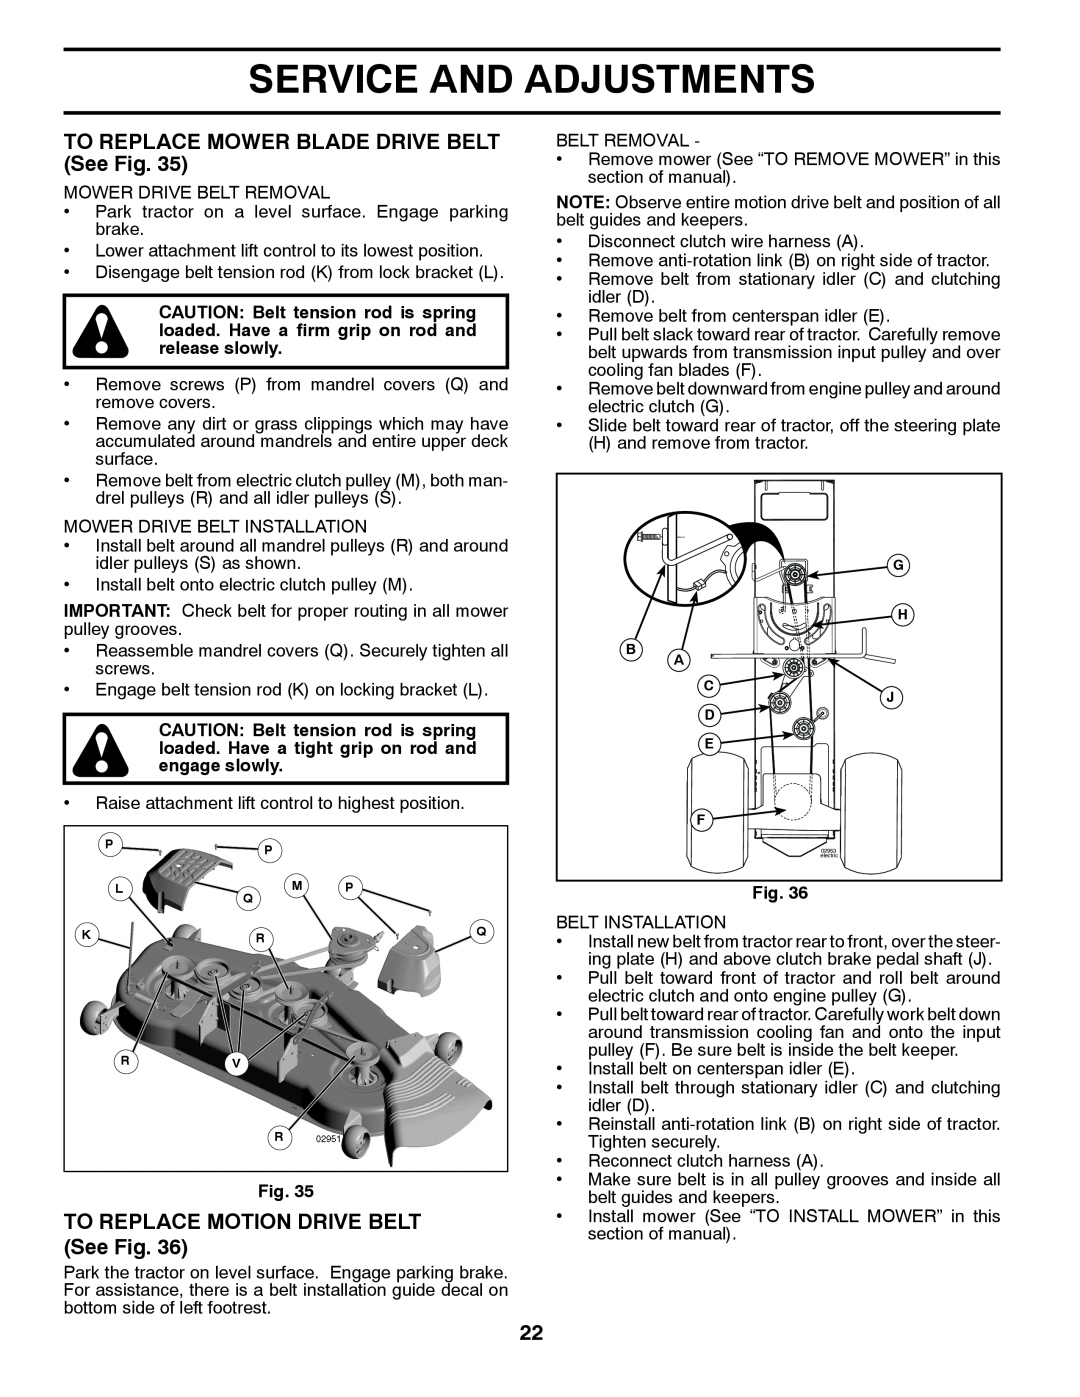 Husqvarna 96043006800, 2354GXLS owner manual TO REPLACE MOWER BLADE DRIVE BELT See Fig, TO REPLACE MOTION DRIVE BELT See Fig 